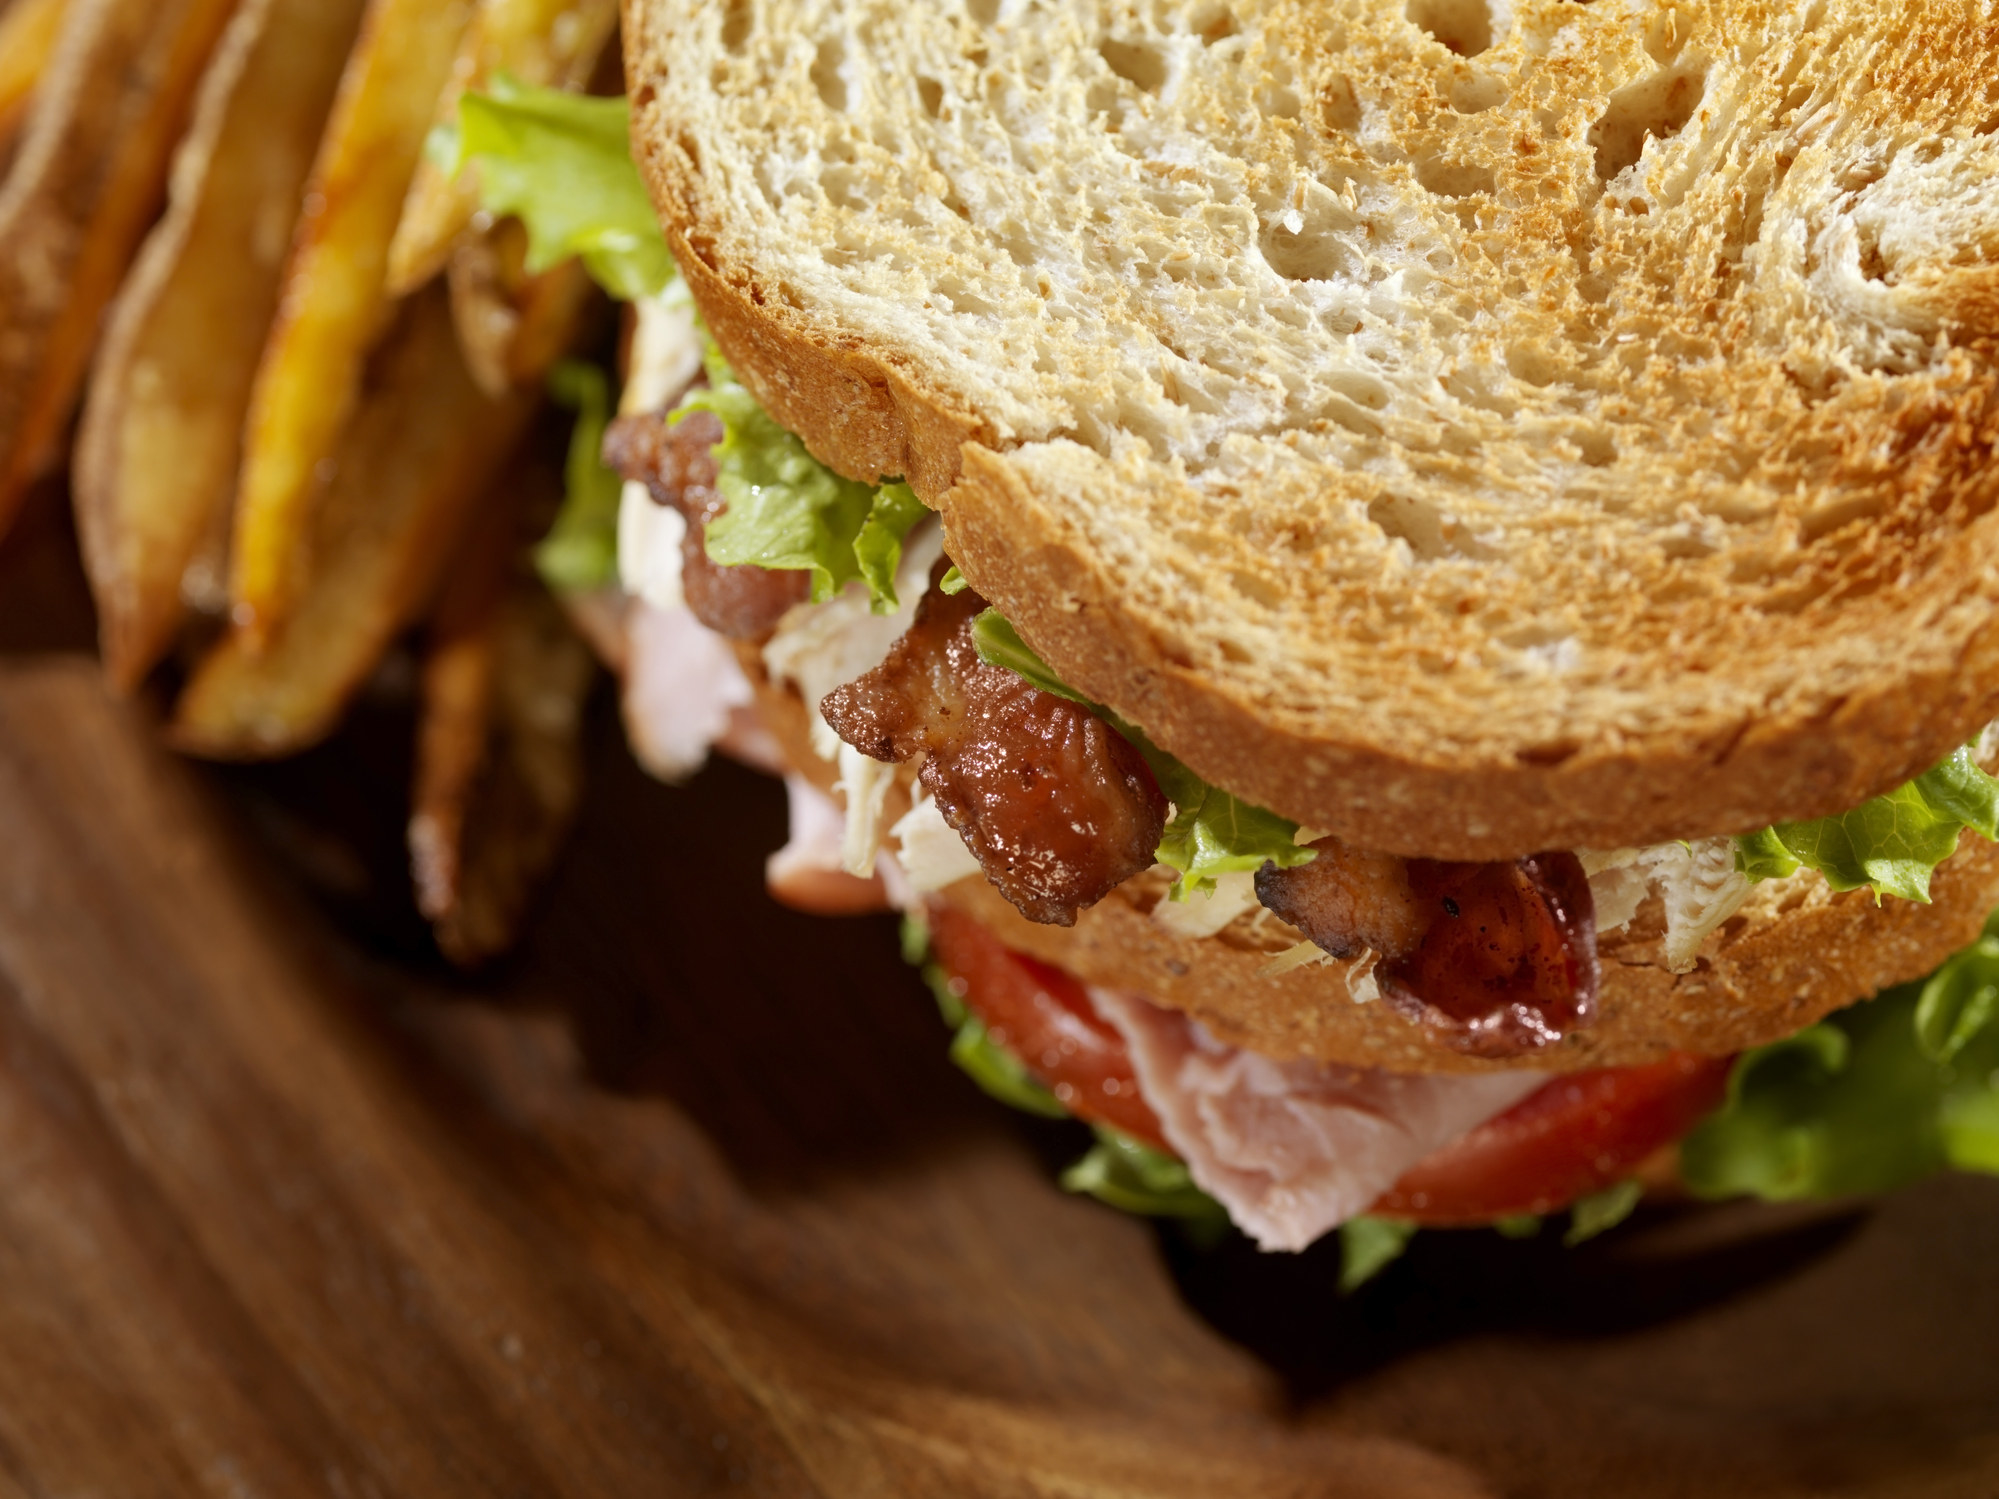 A club sandwich and fries.